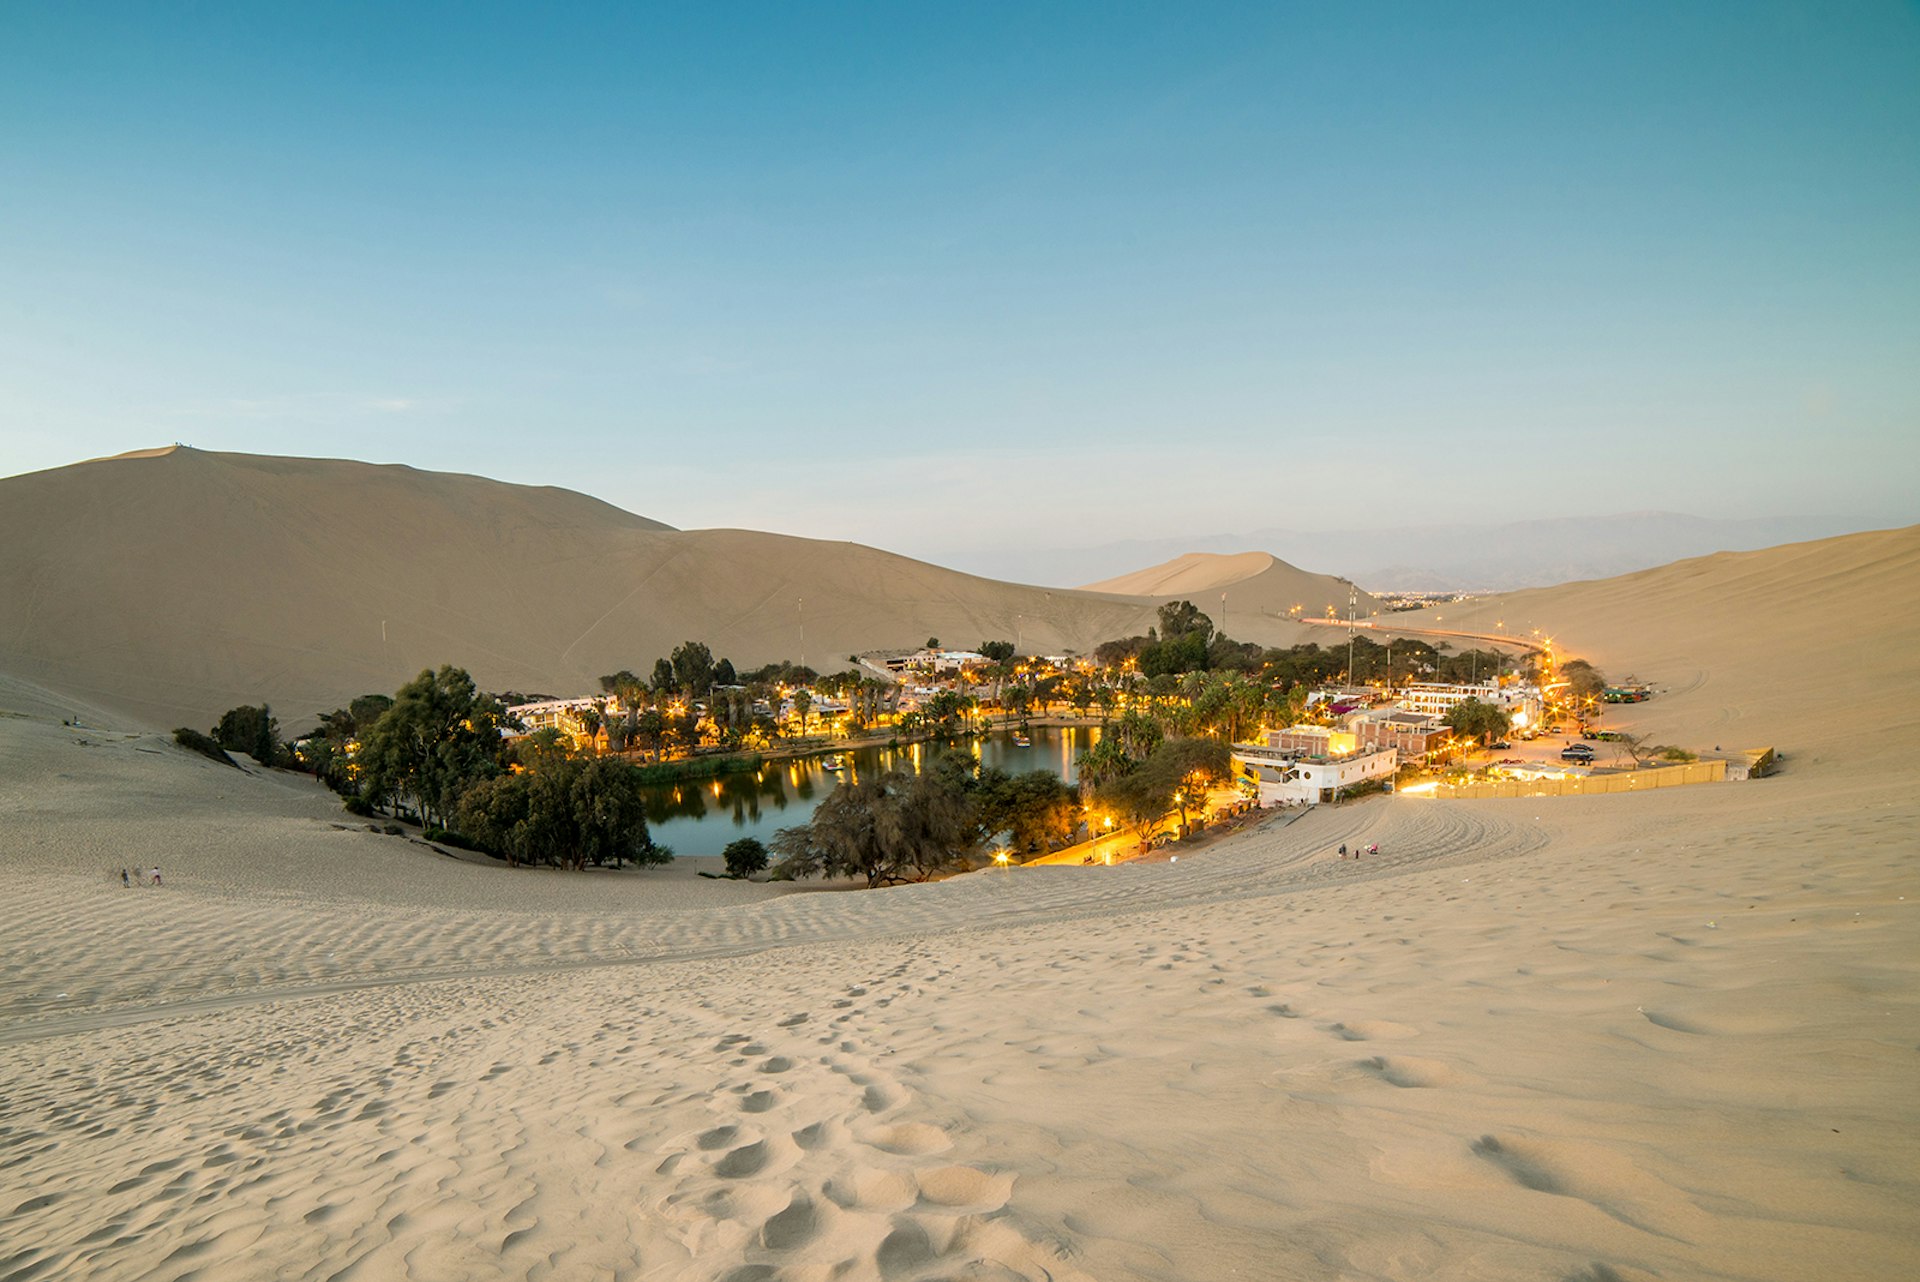 The desert oasis of Huacachina at dusk. The small body of water is surrounded by bushy green trees, white buildings and lights. 